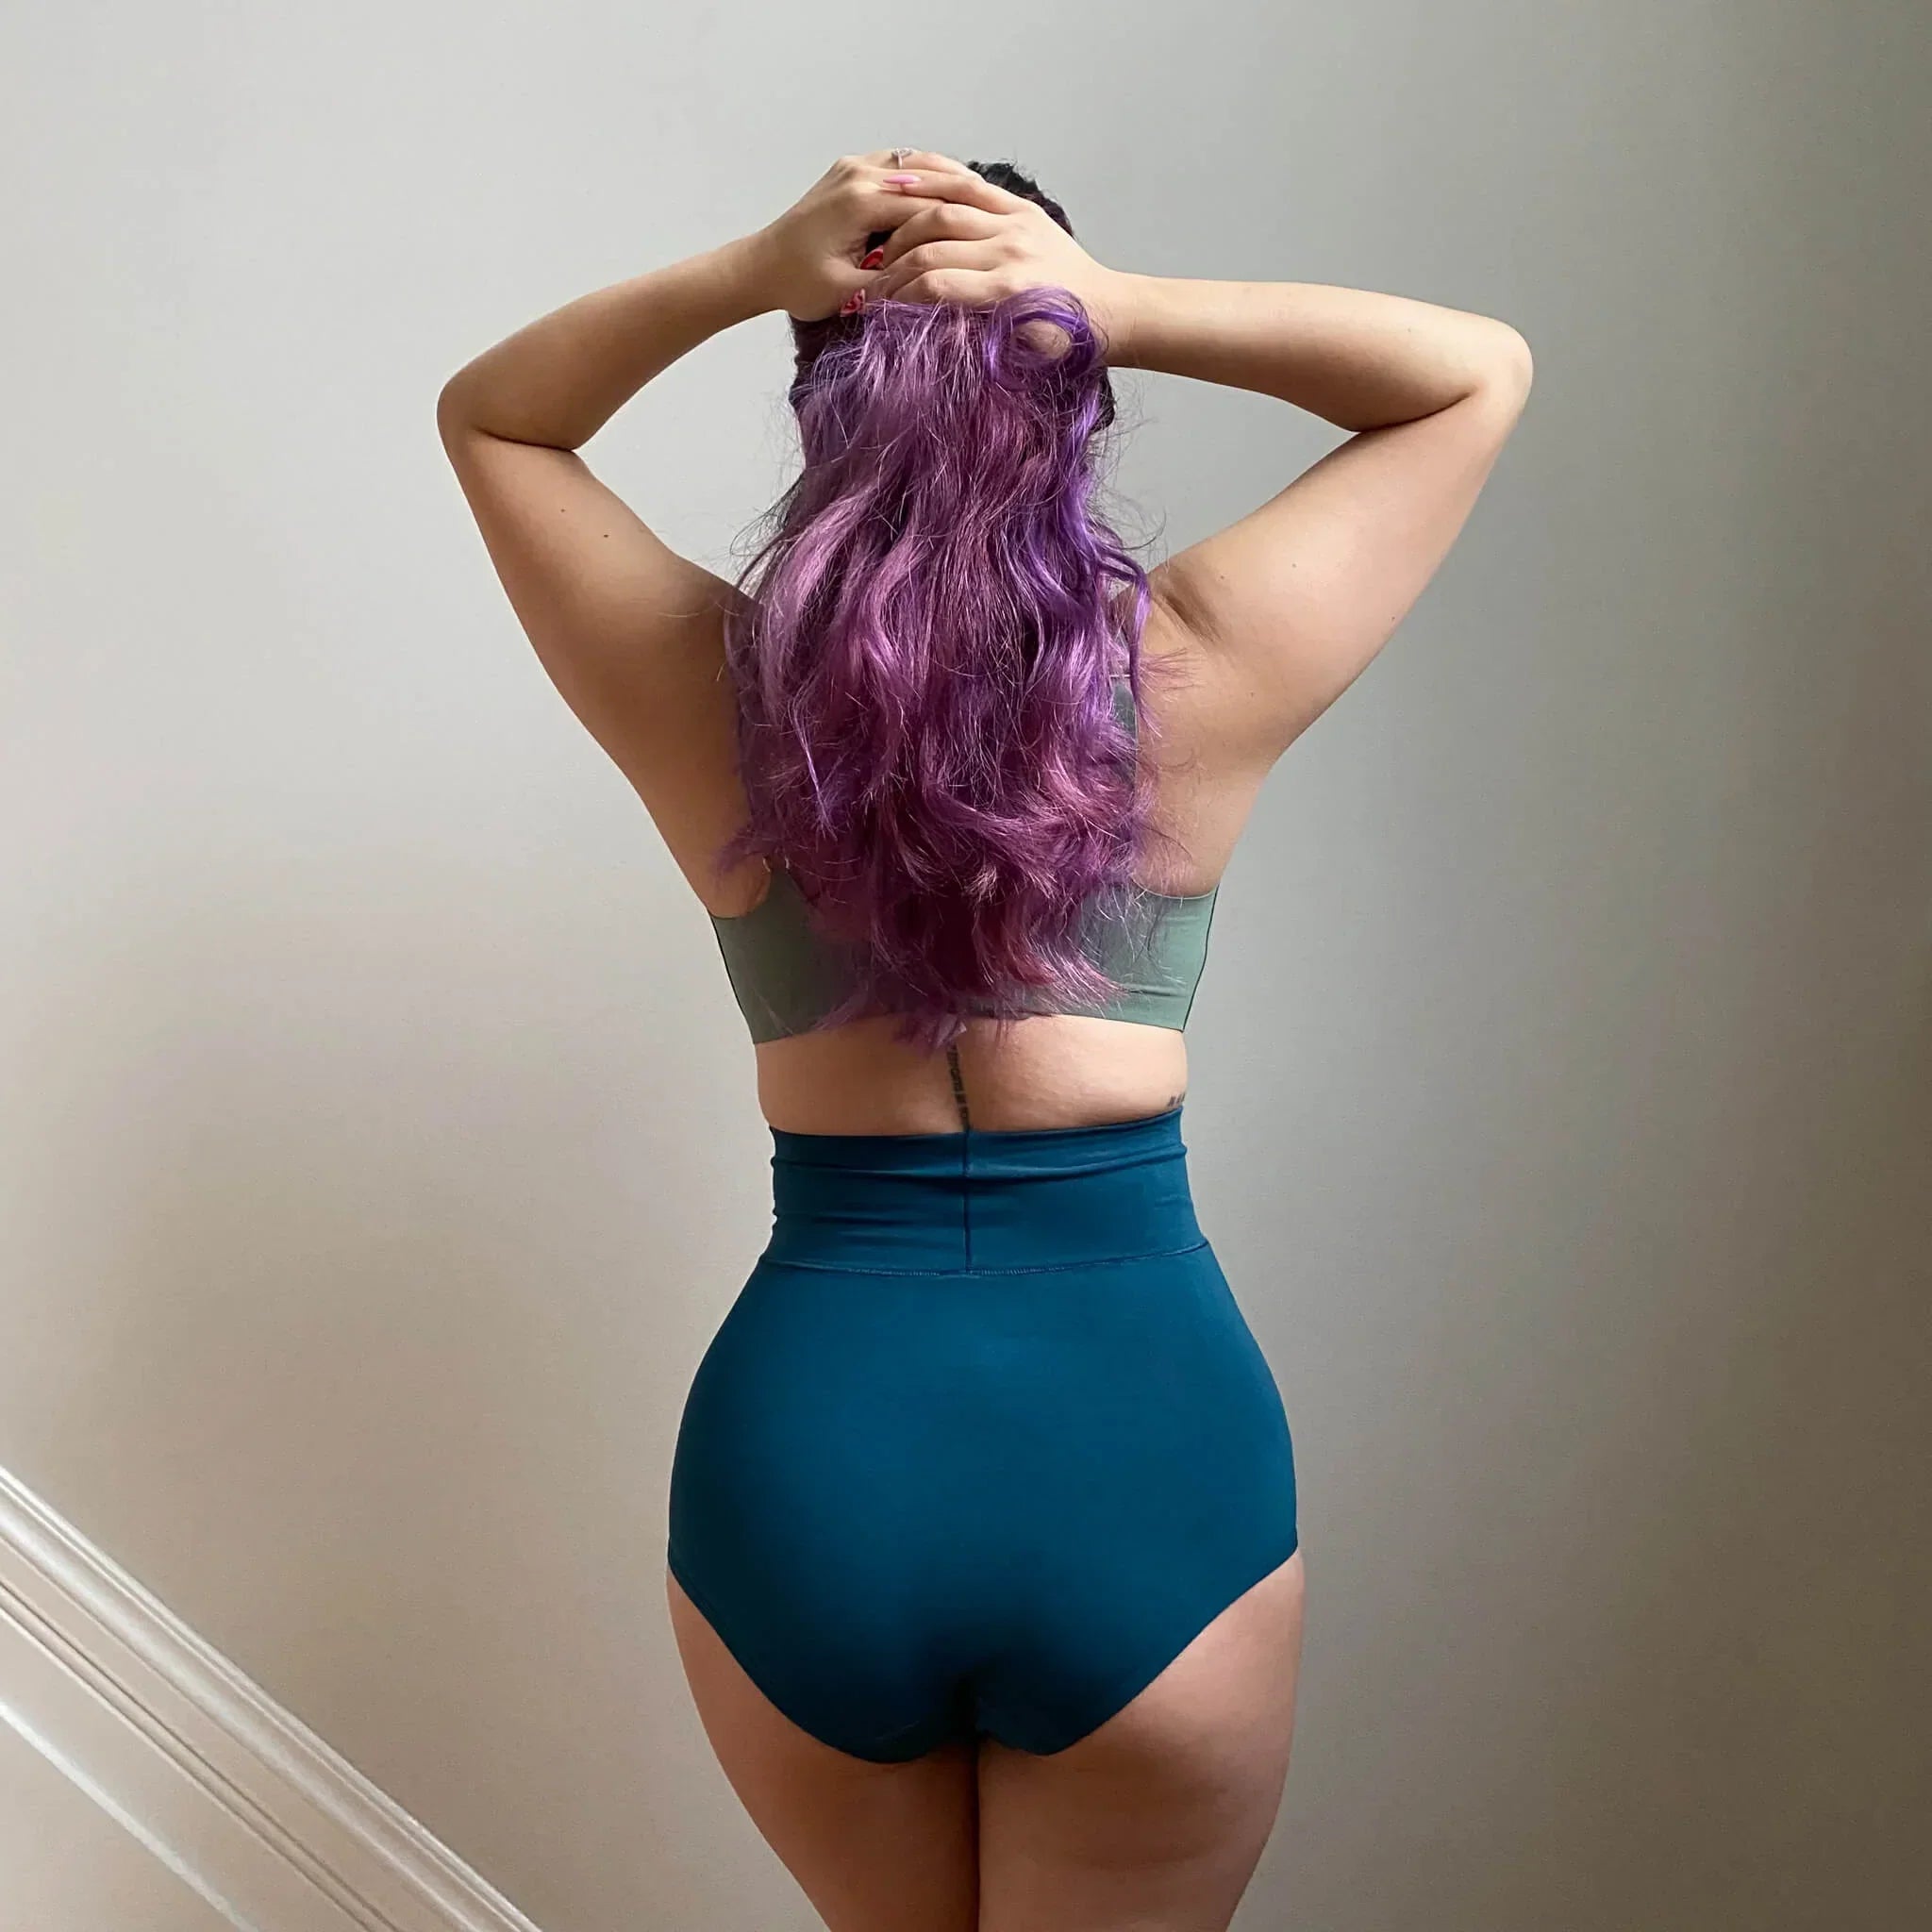 shoppers are snapping up these high-waist knickers that